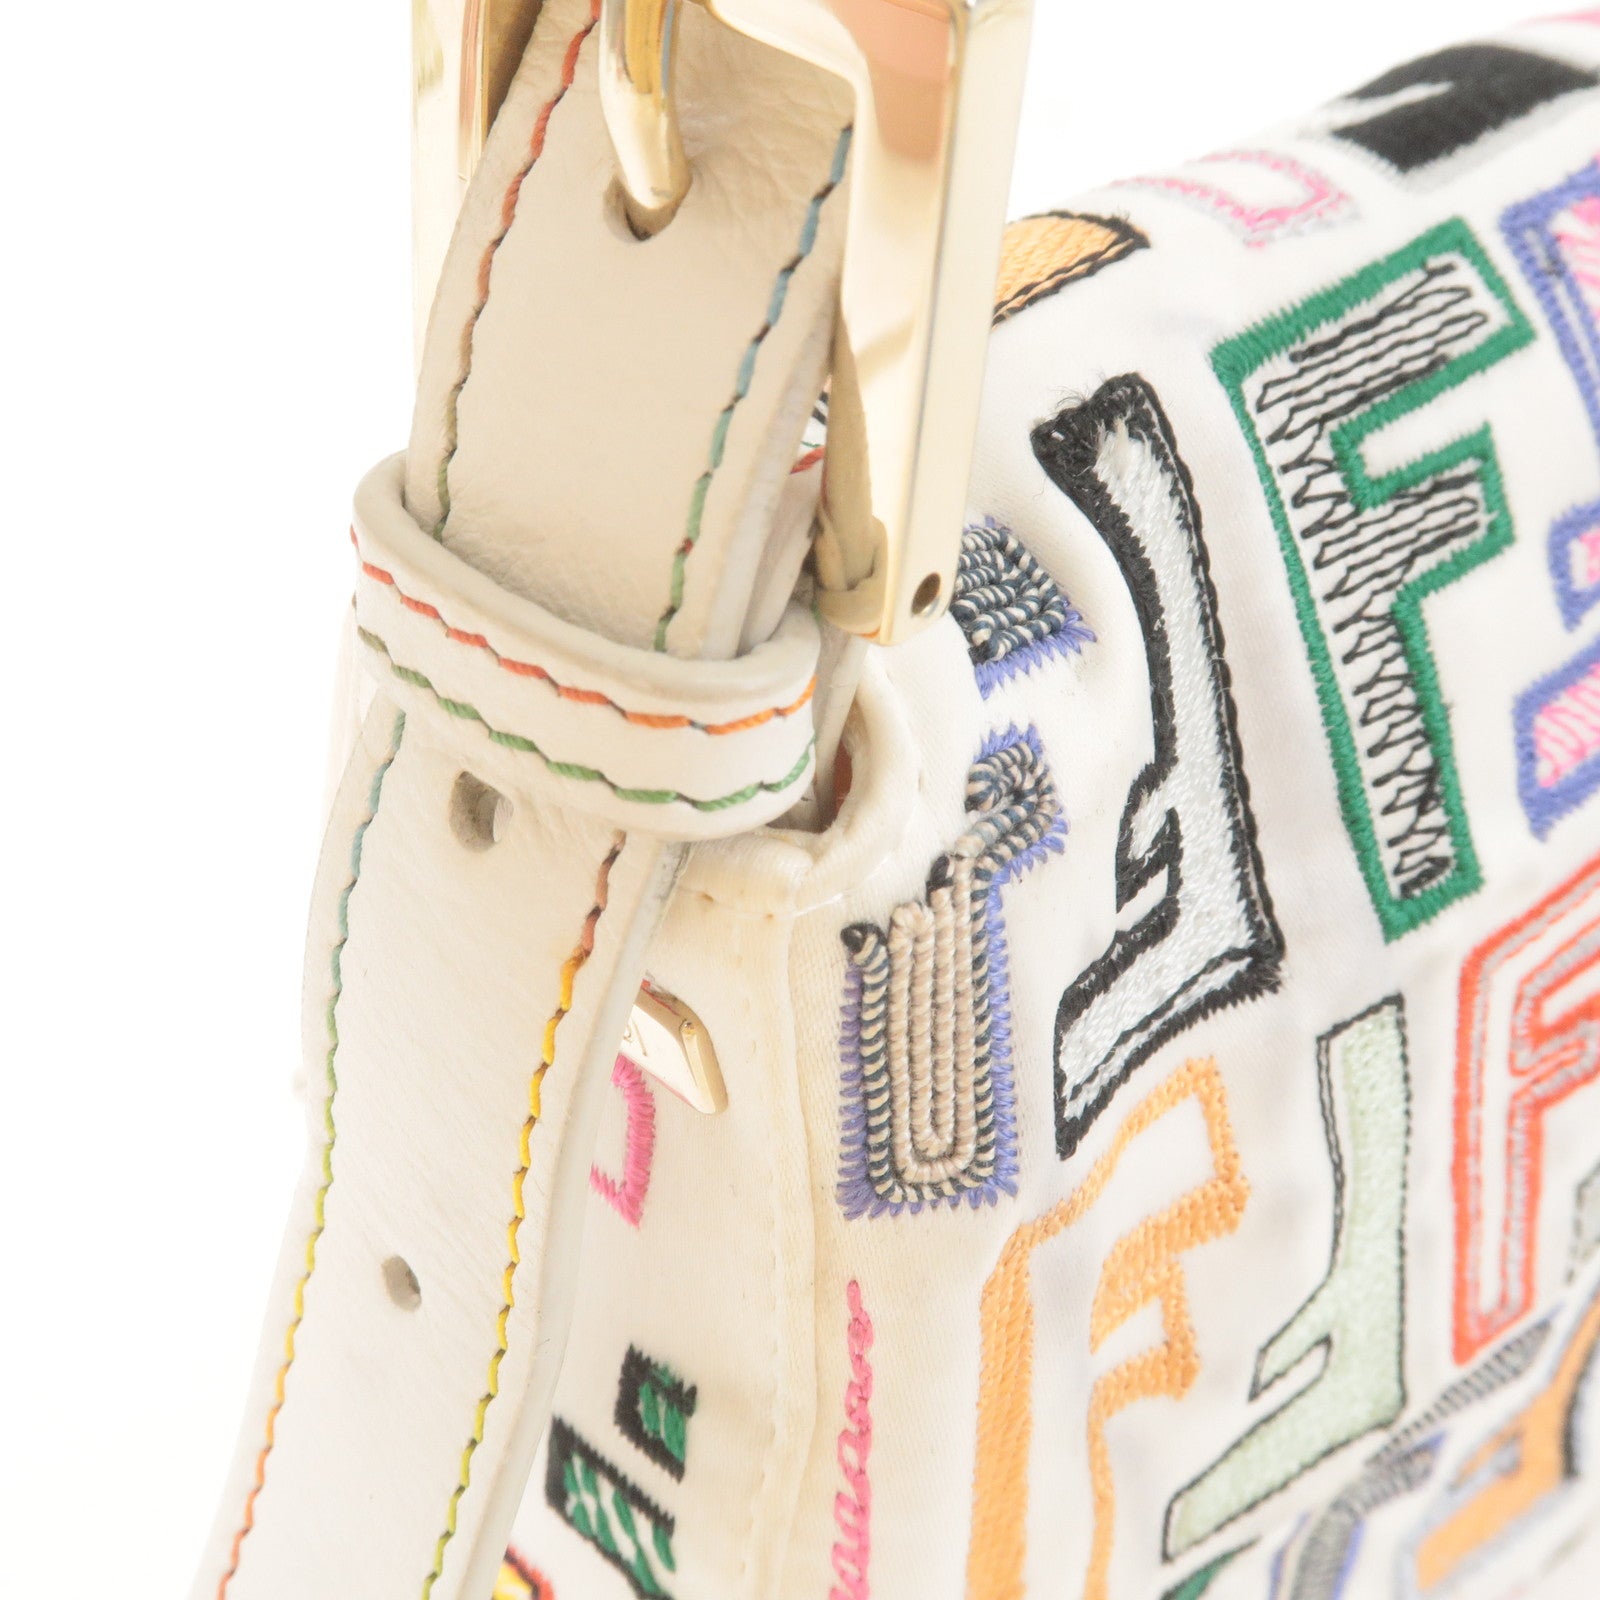 Baguette - Multicolor canvas bag with FF embroidery